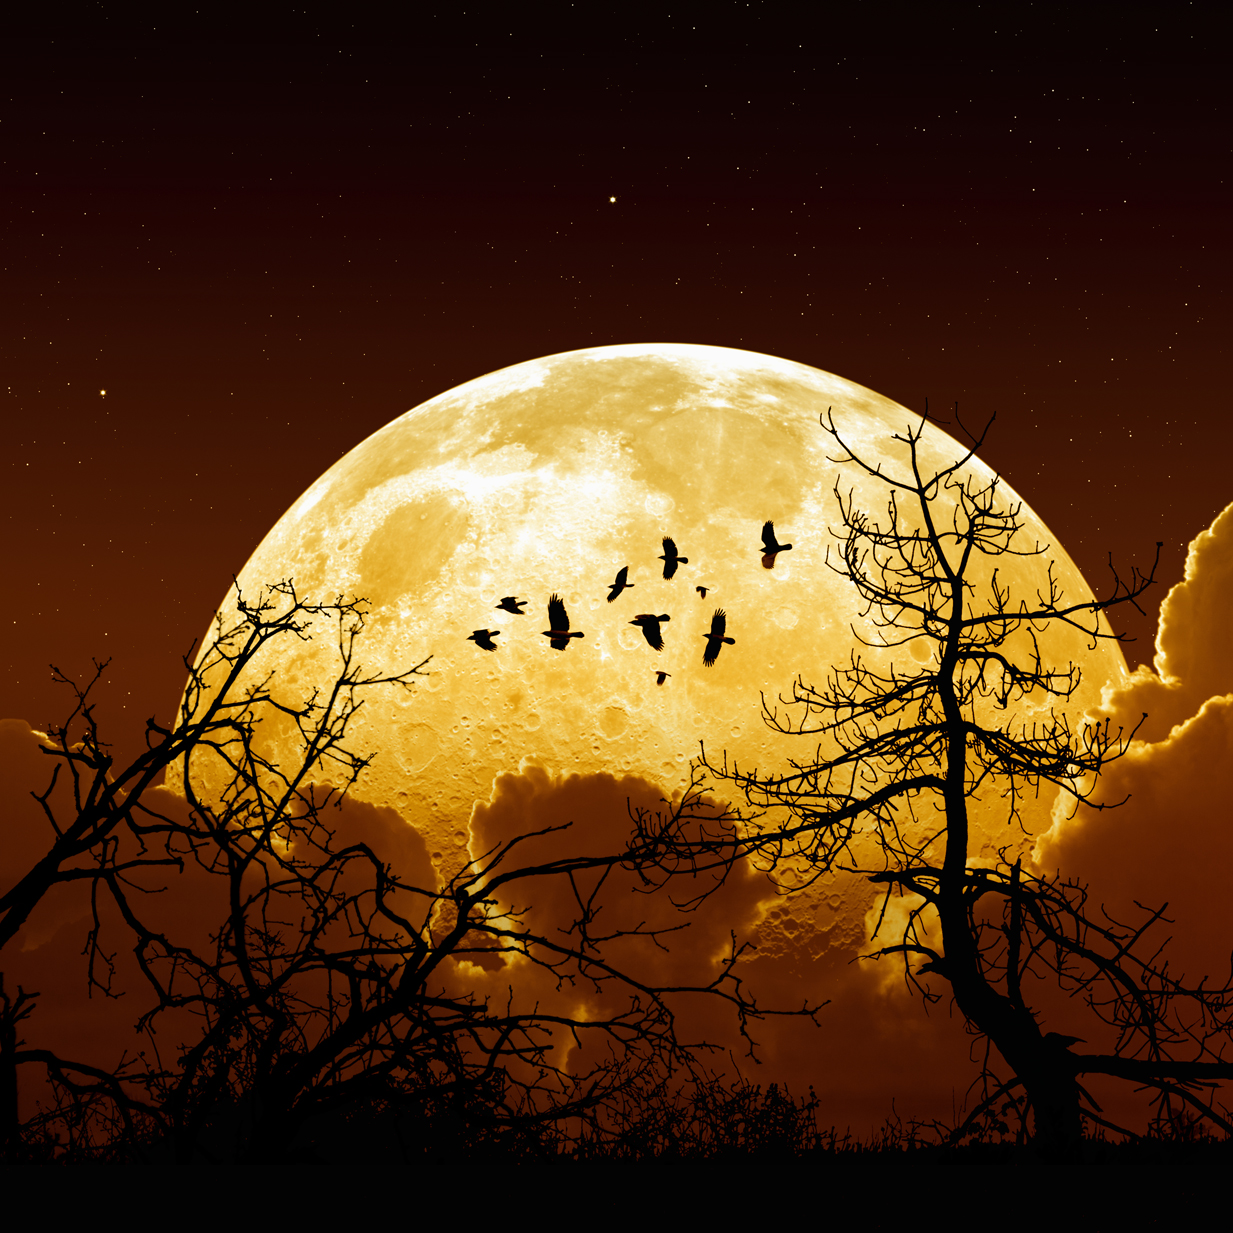 Full Moon Night sky with yellow full moon, stars, flock of flying ravens, crows, tree silhouette. Elements of this image furnished by NASA